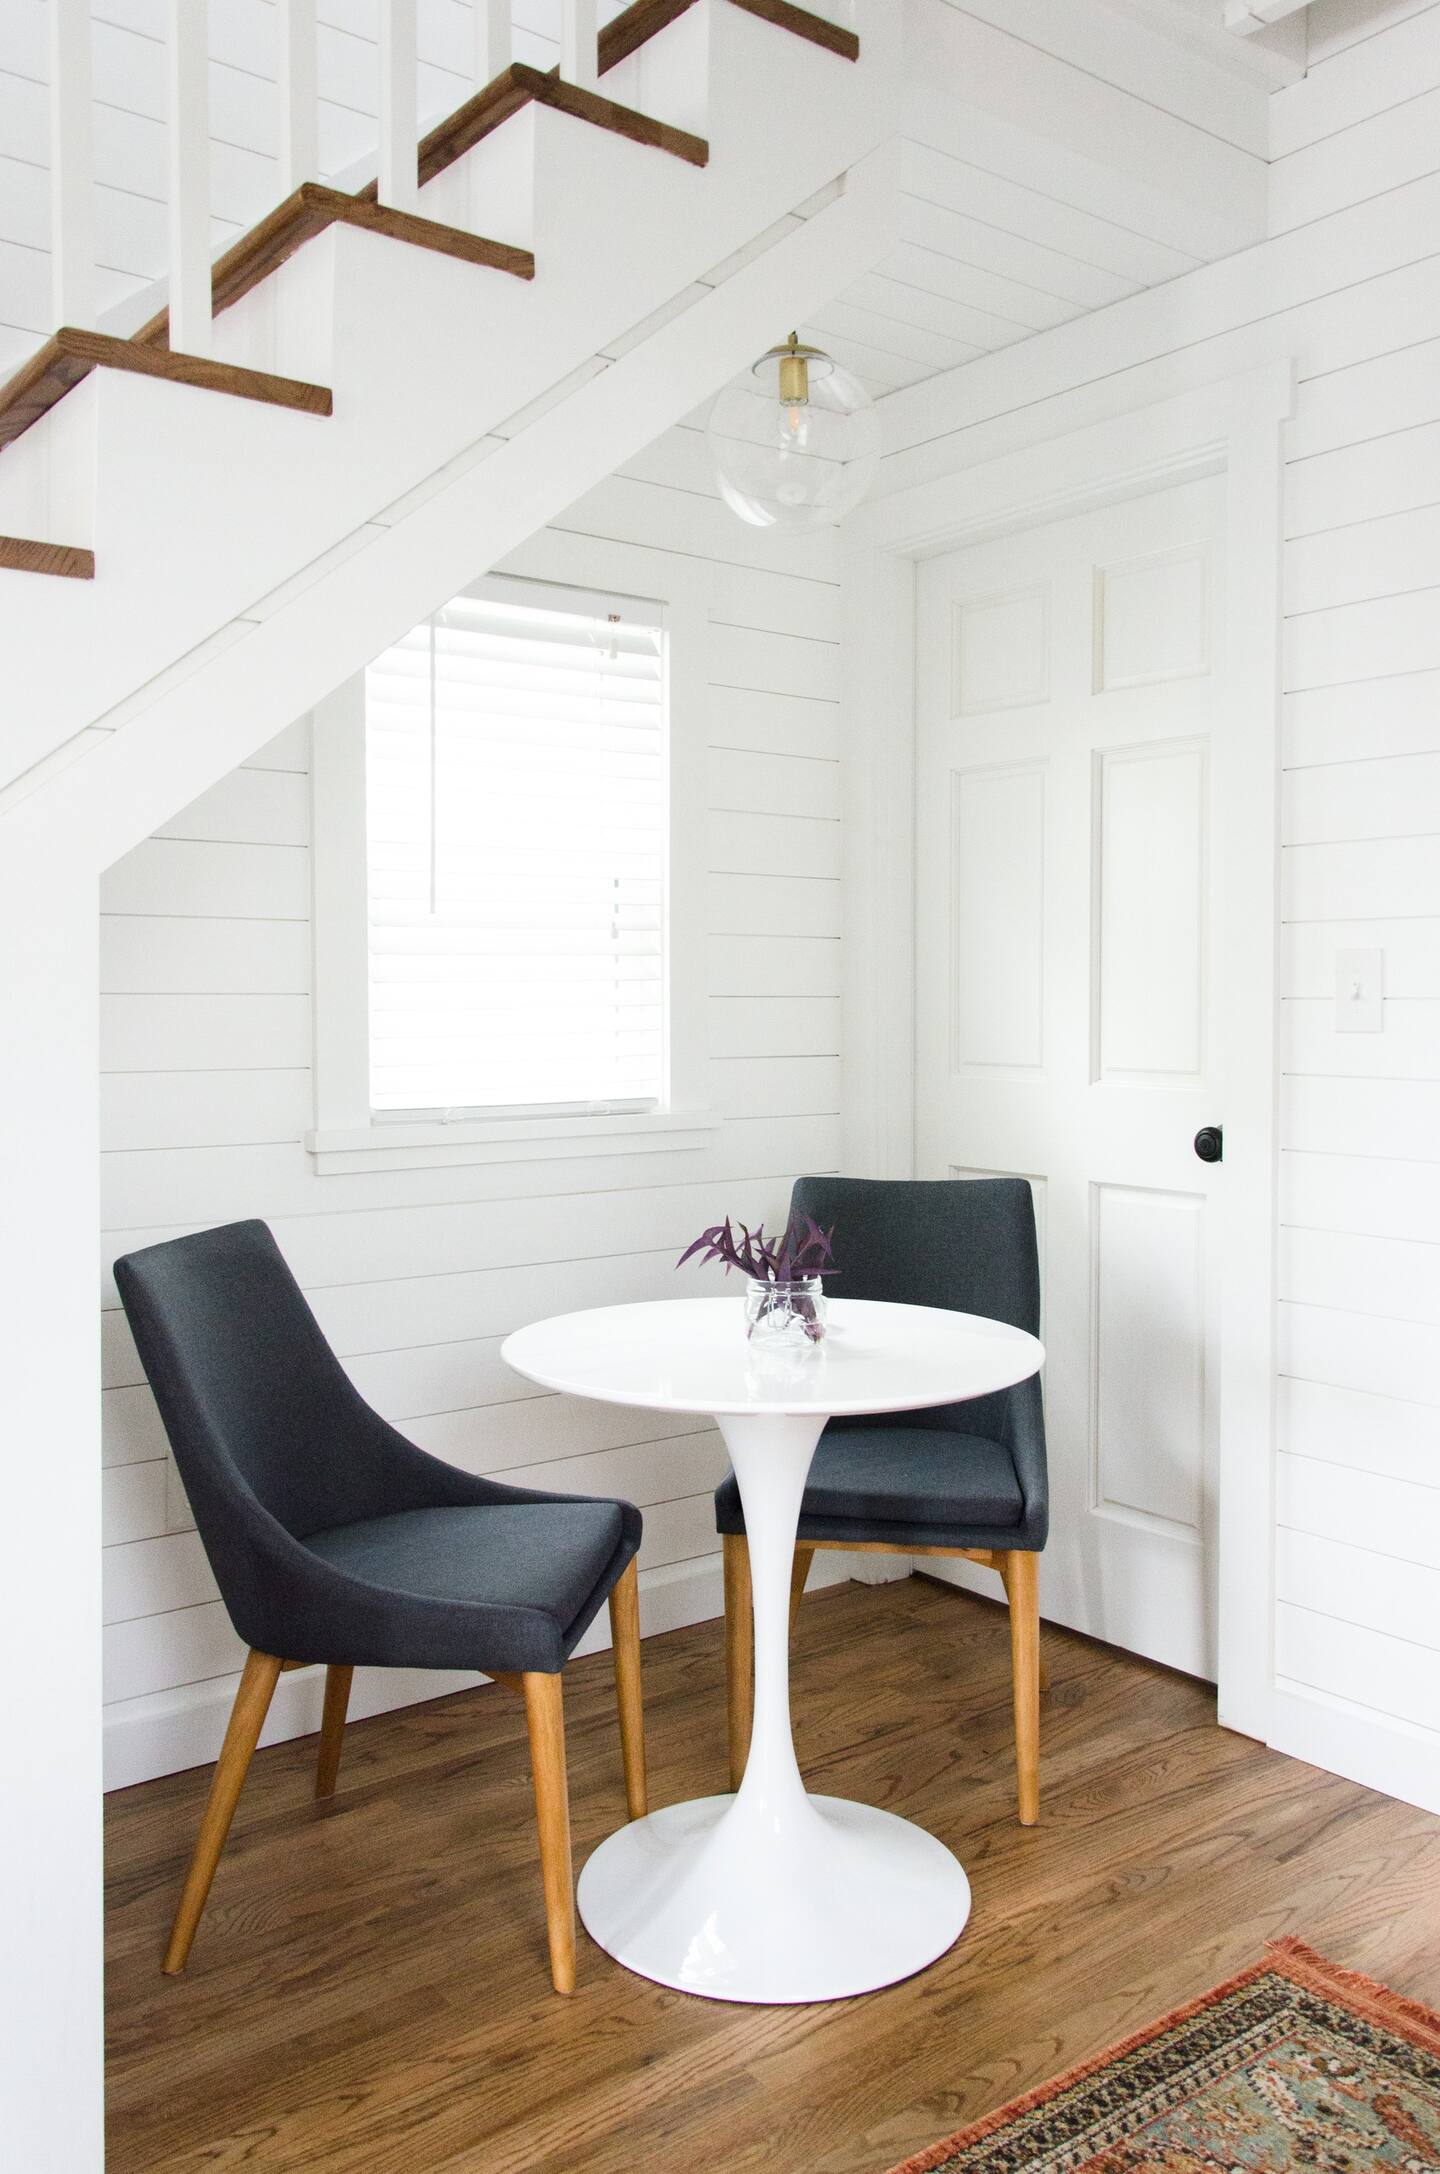 Dining room below the stairs with white round table and two gray chairs